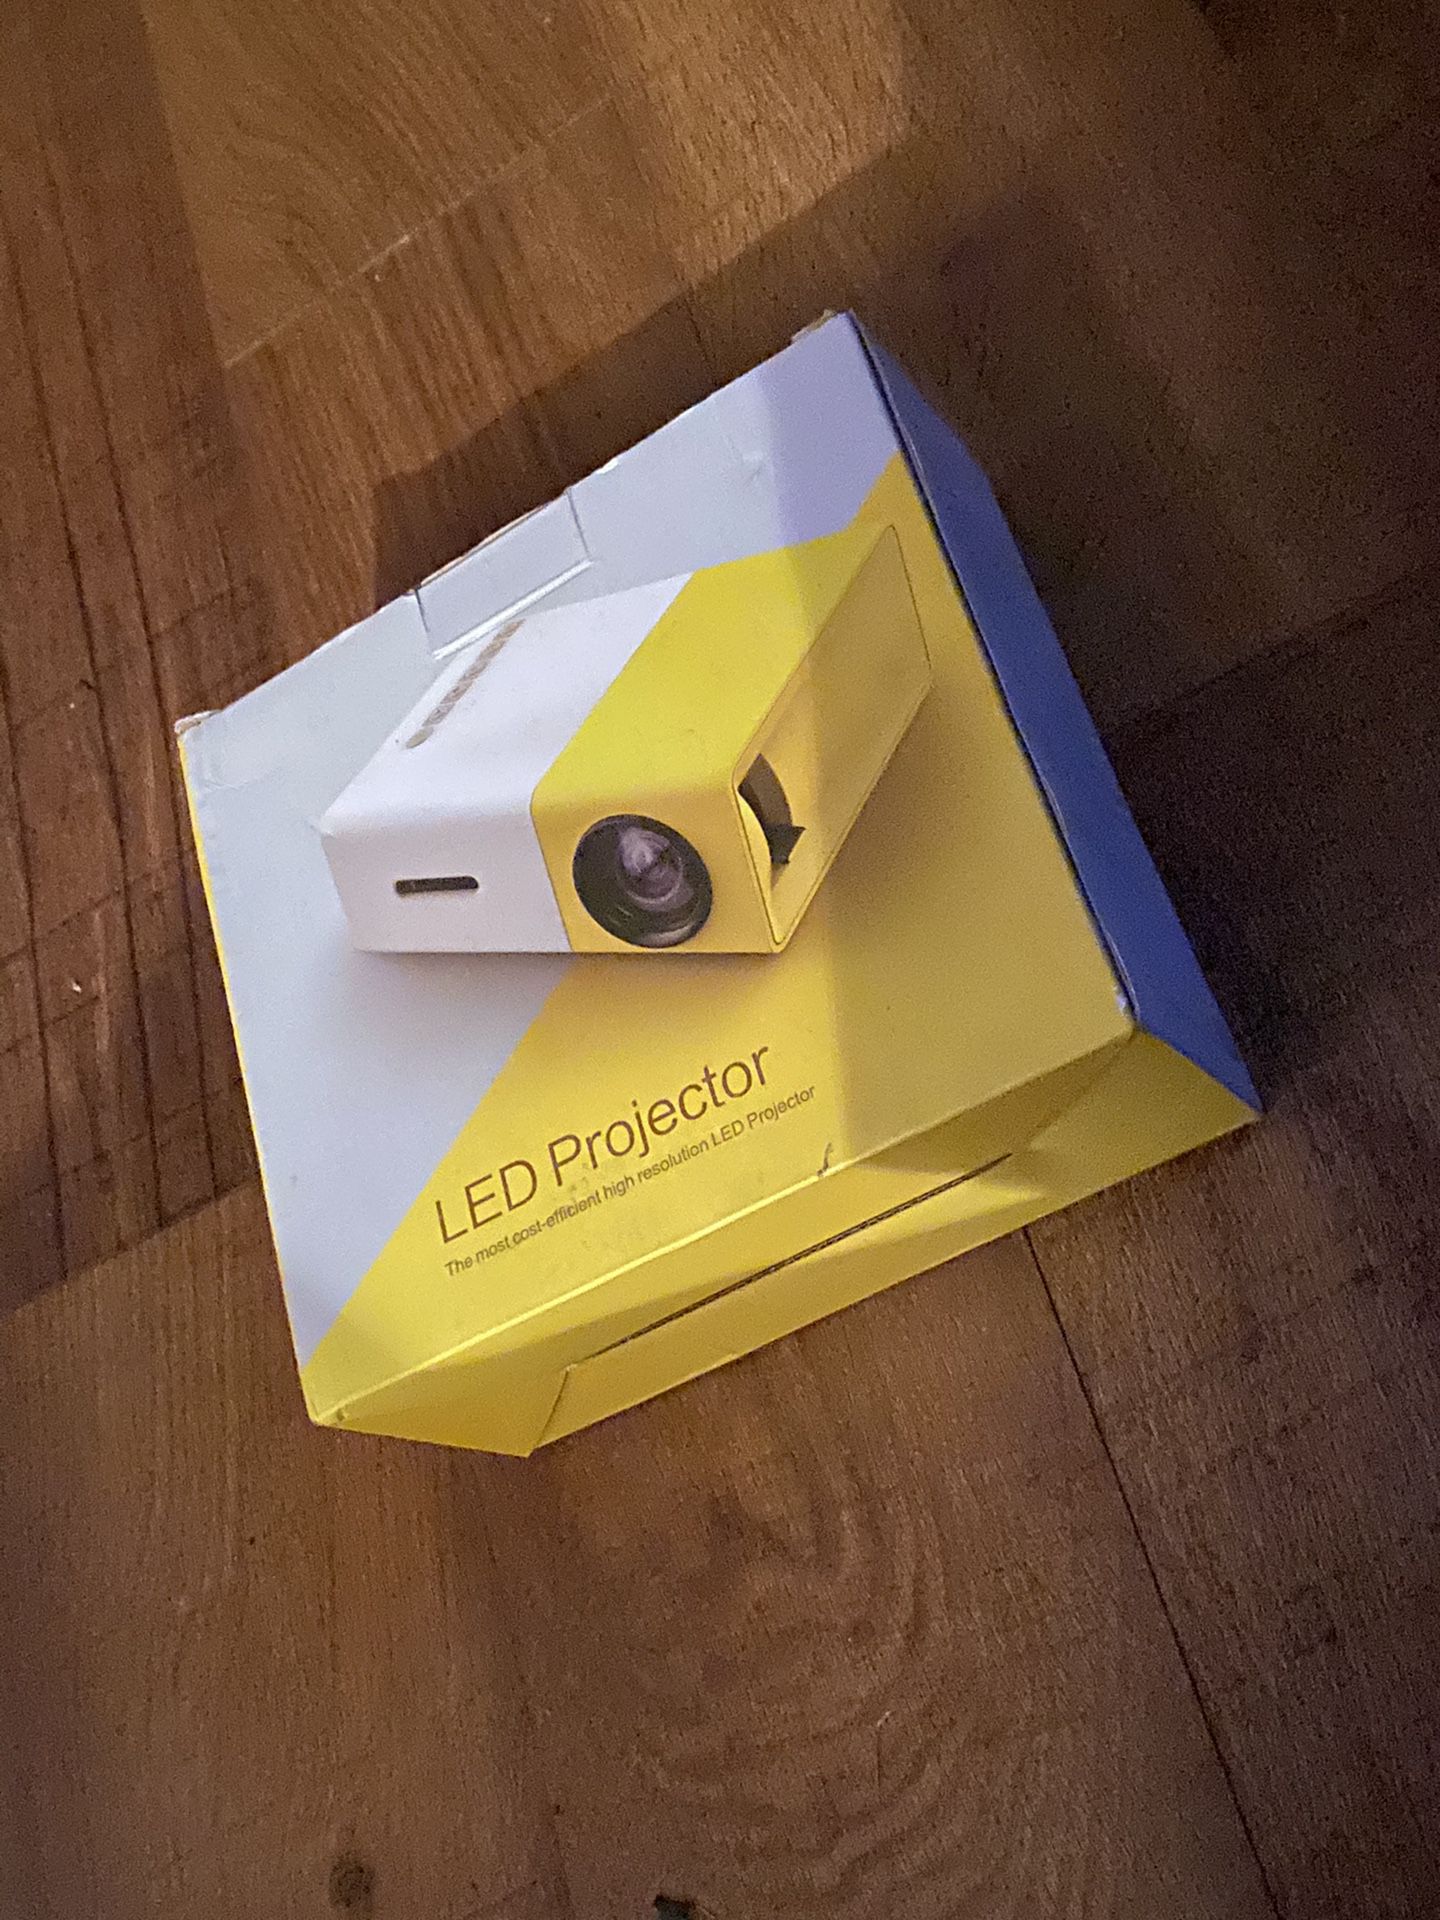 LED projector new in box